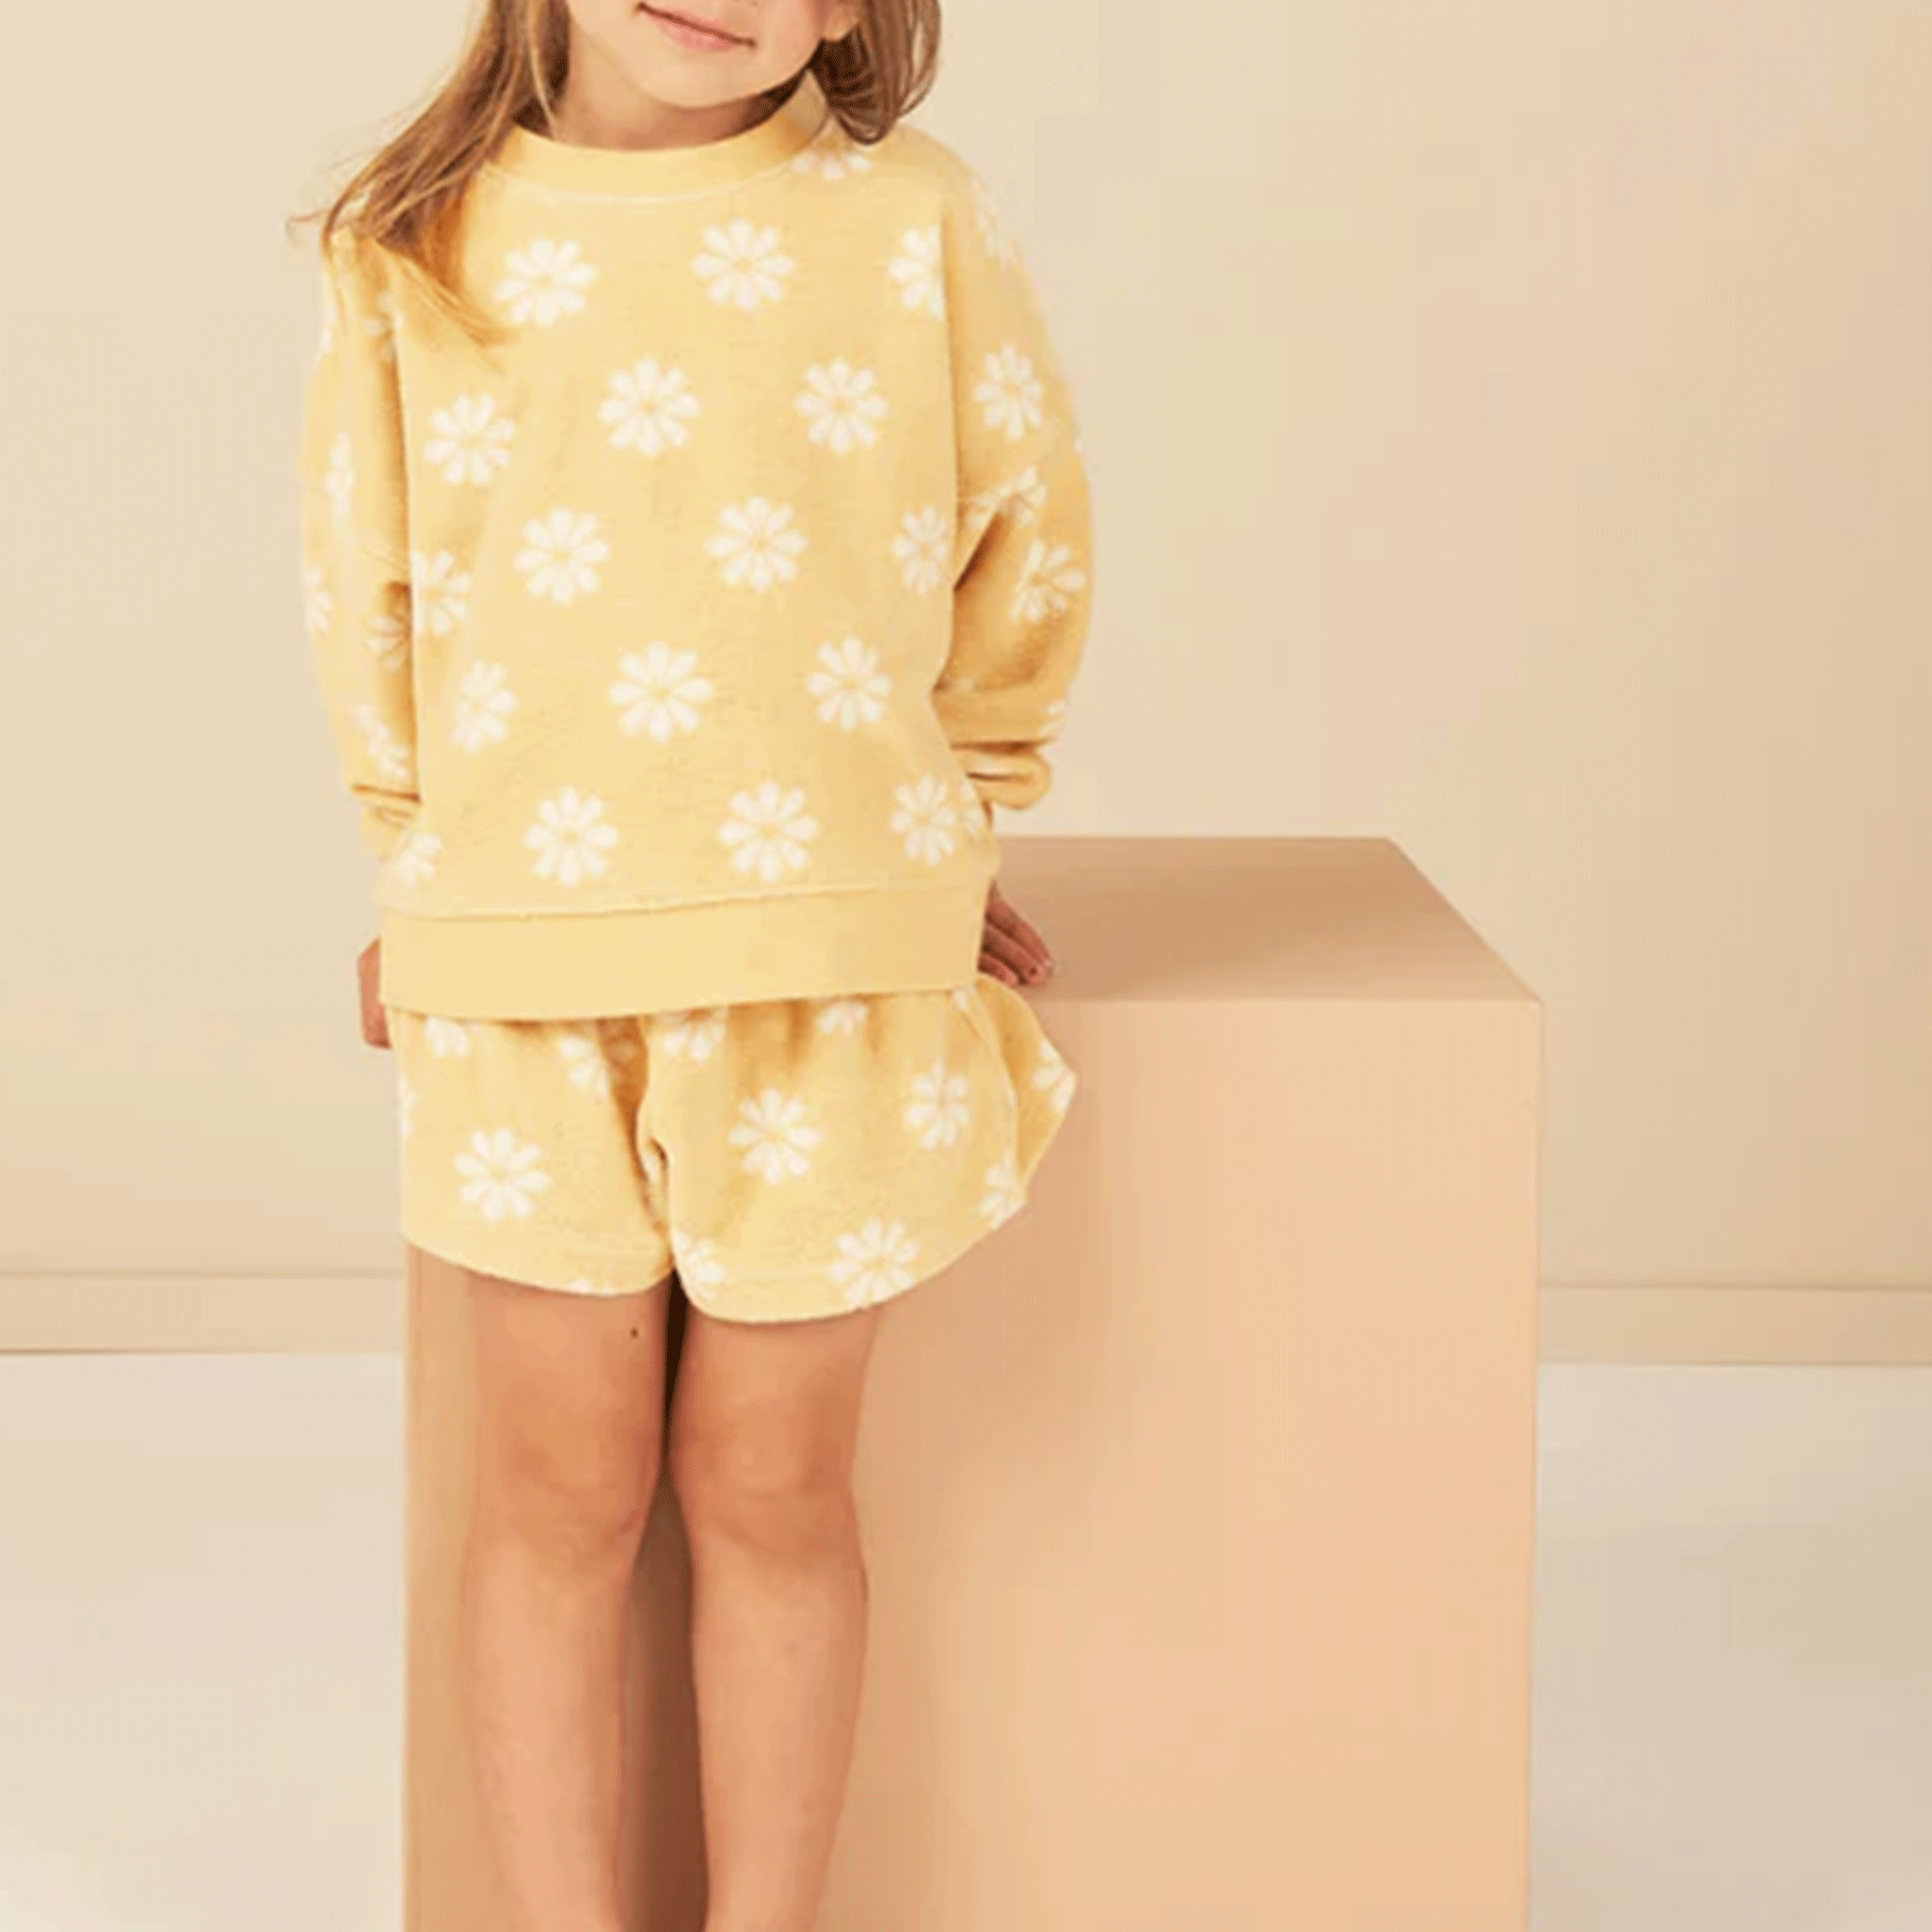 A yellow and white daisy printed pullover sweatshirt. Accessories and shorts not included.